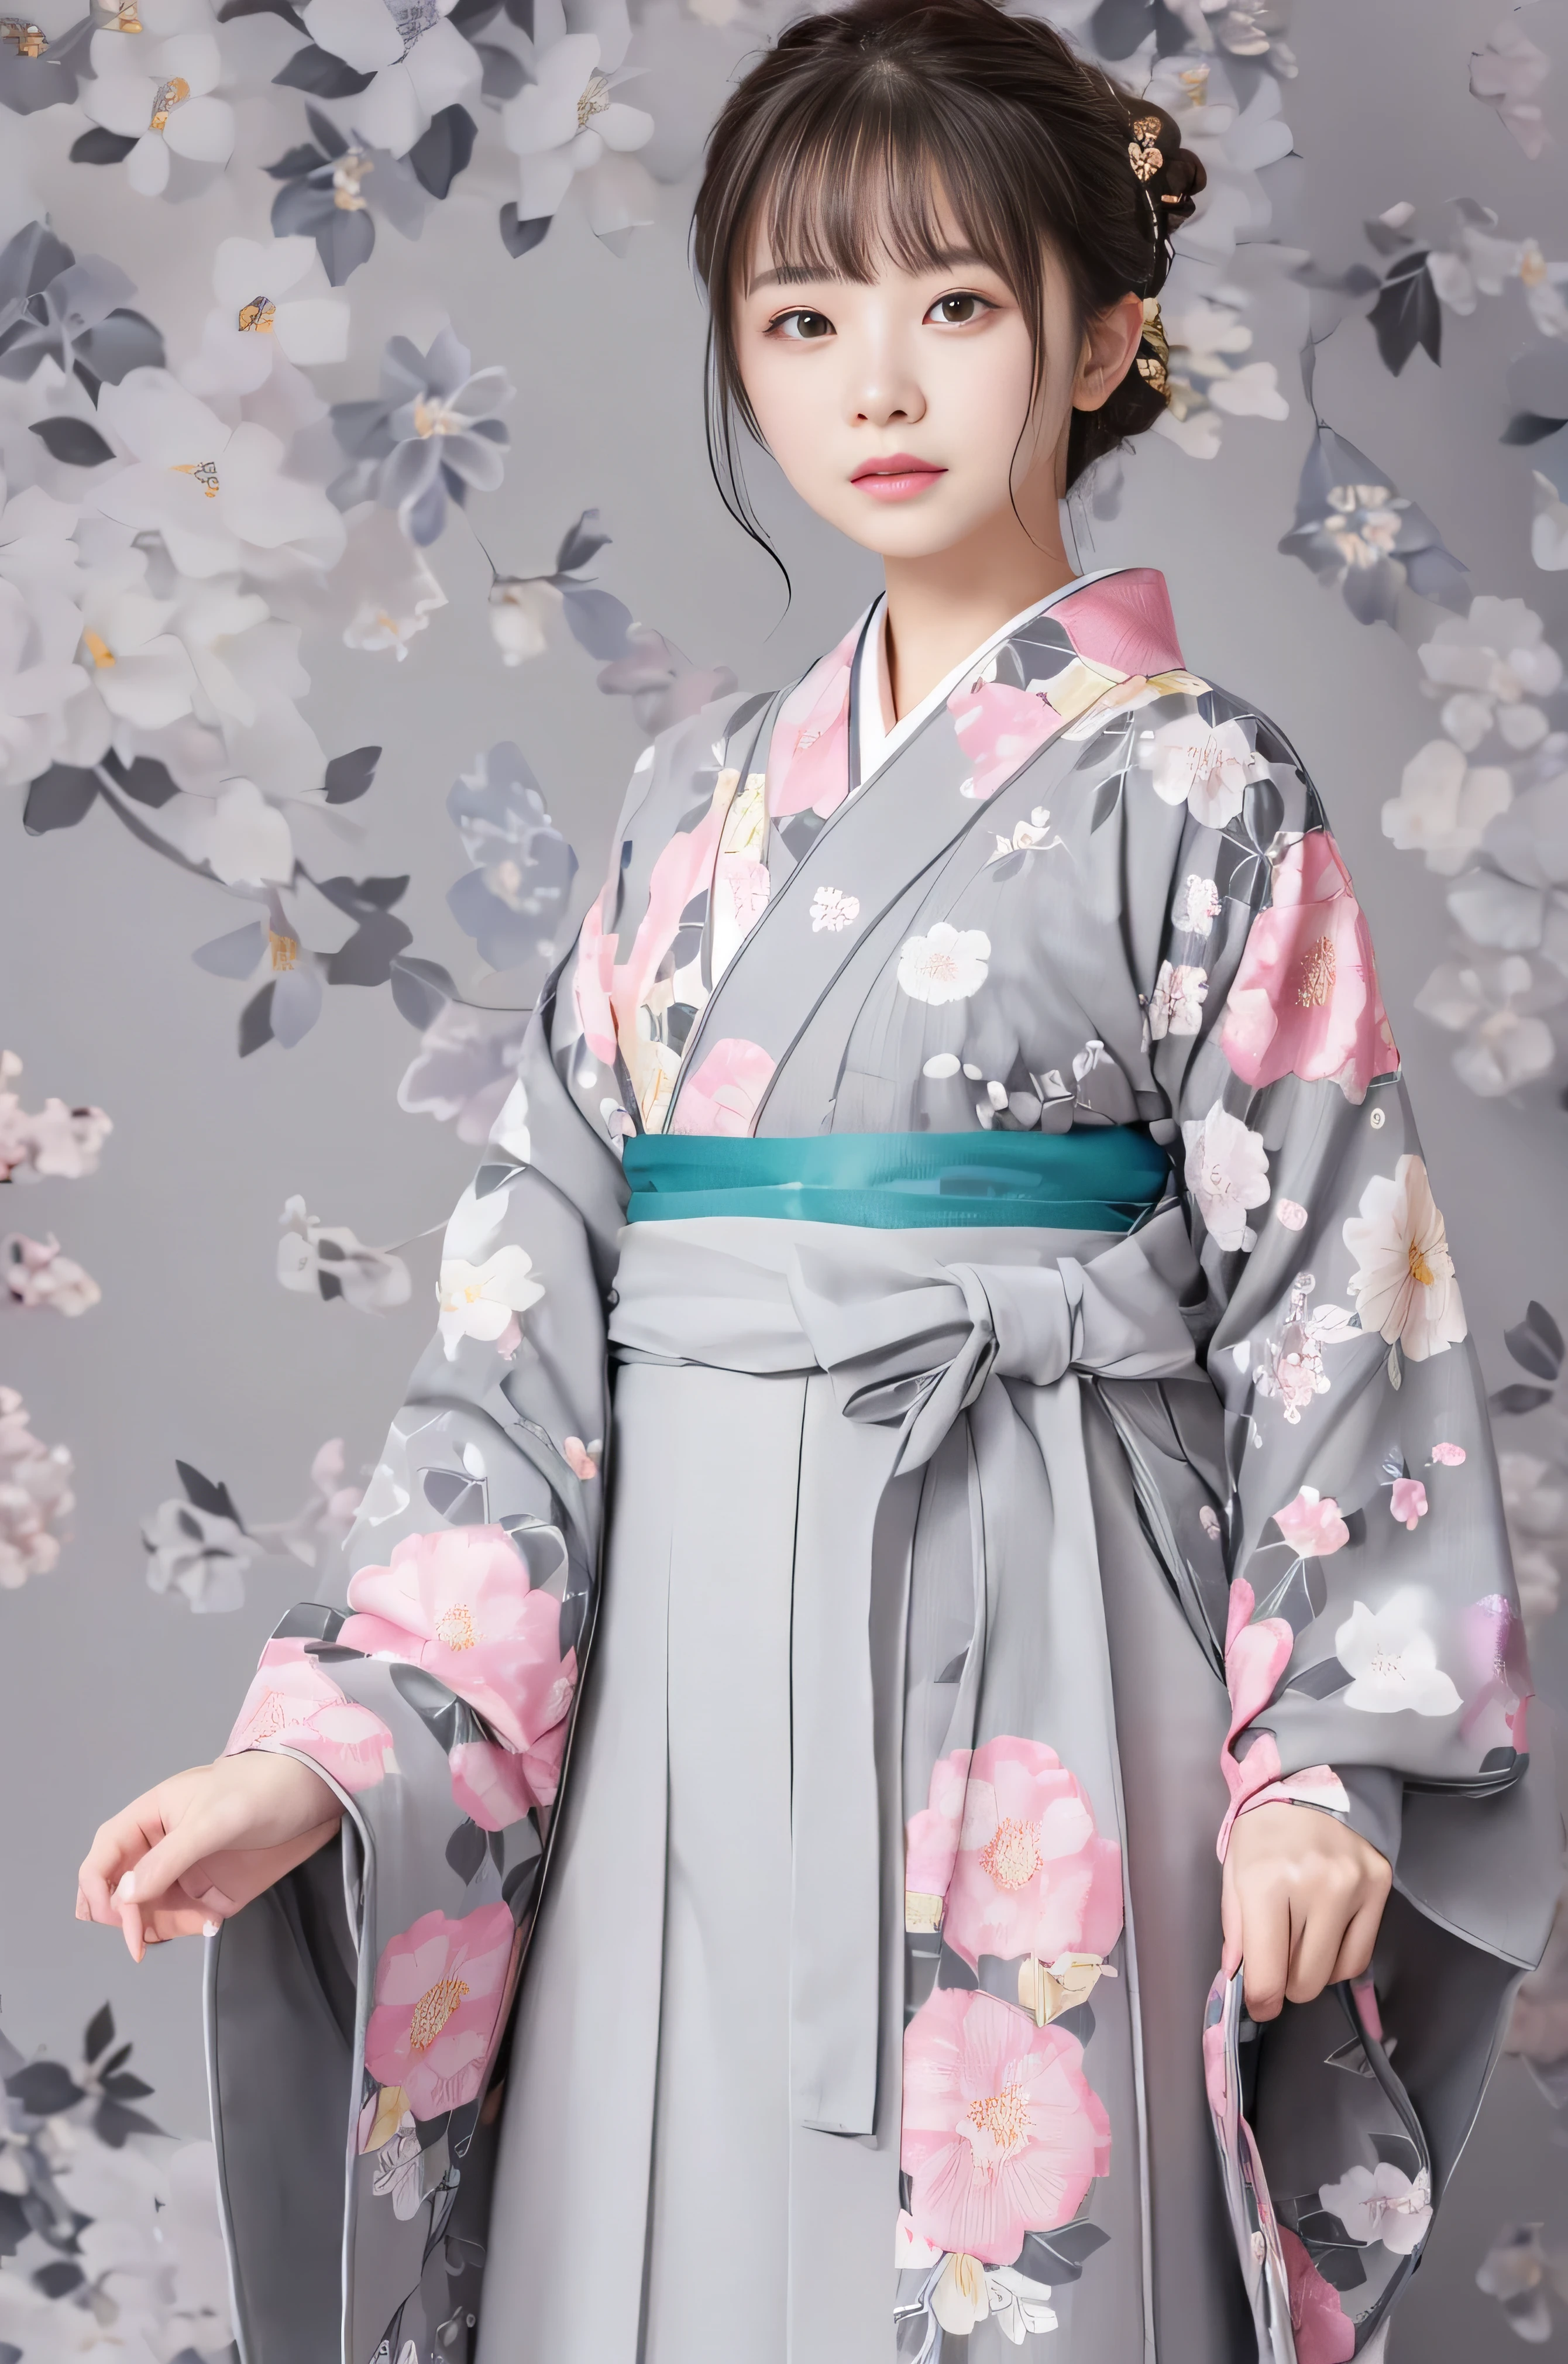 (((gray floral background:1.3)))、highest quality, Tabletop, High resolution, (((One Girl))), 16 years old,(((Eyes are grey:1.3)))、Gray kimono、((Beautiful Gray Kimono)), Tyndall effect, Realistic, Shadow Studio,Ultramarine Lighting, Dual Tone Lighting, (High Definition Skins: 1.2)、Pale colored lighting、Dim lighting、 Digital SLR, photograph, High resolution, 4K, 8k, Background Blur,Fade out beautifully、Pink flower world